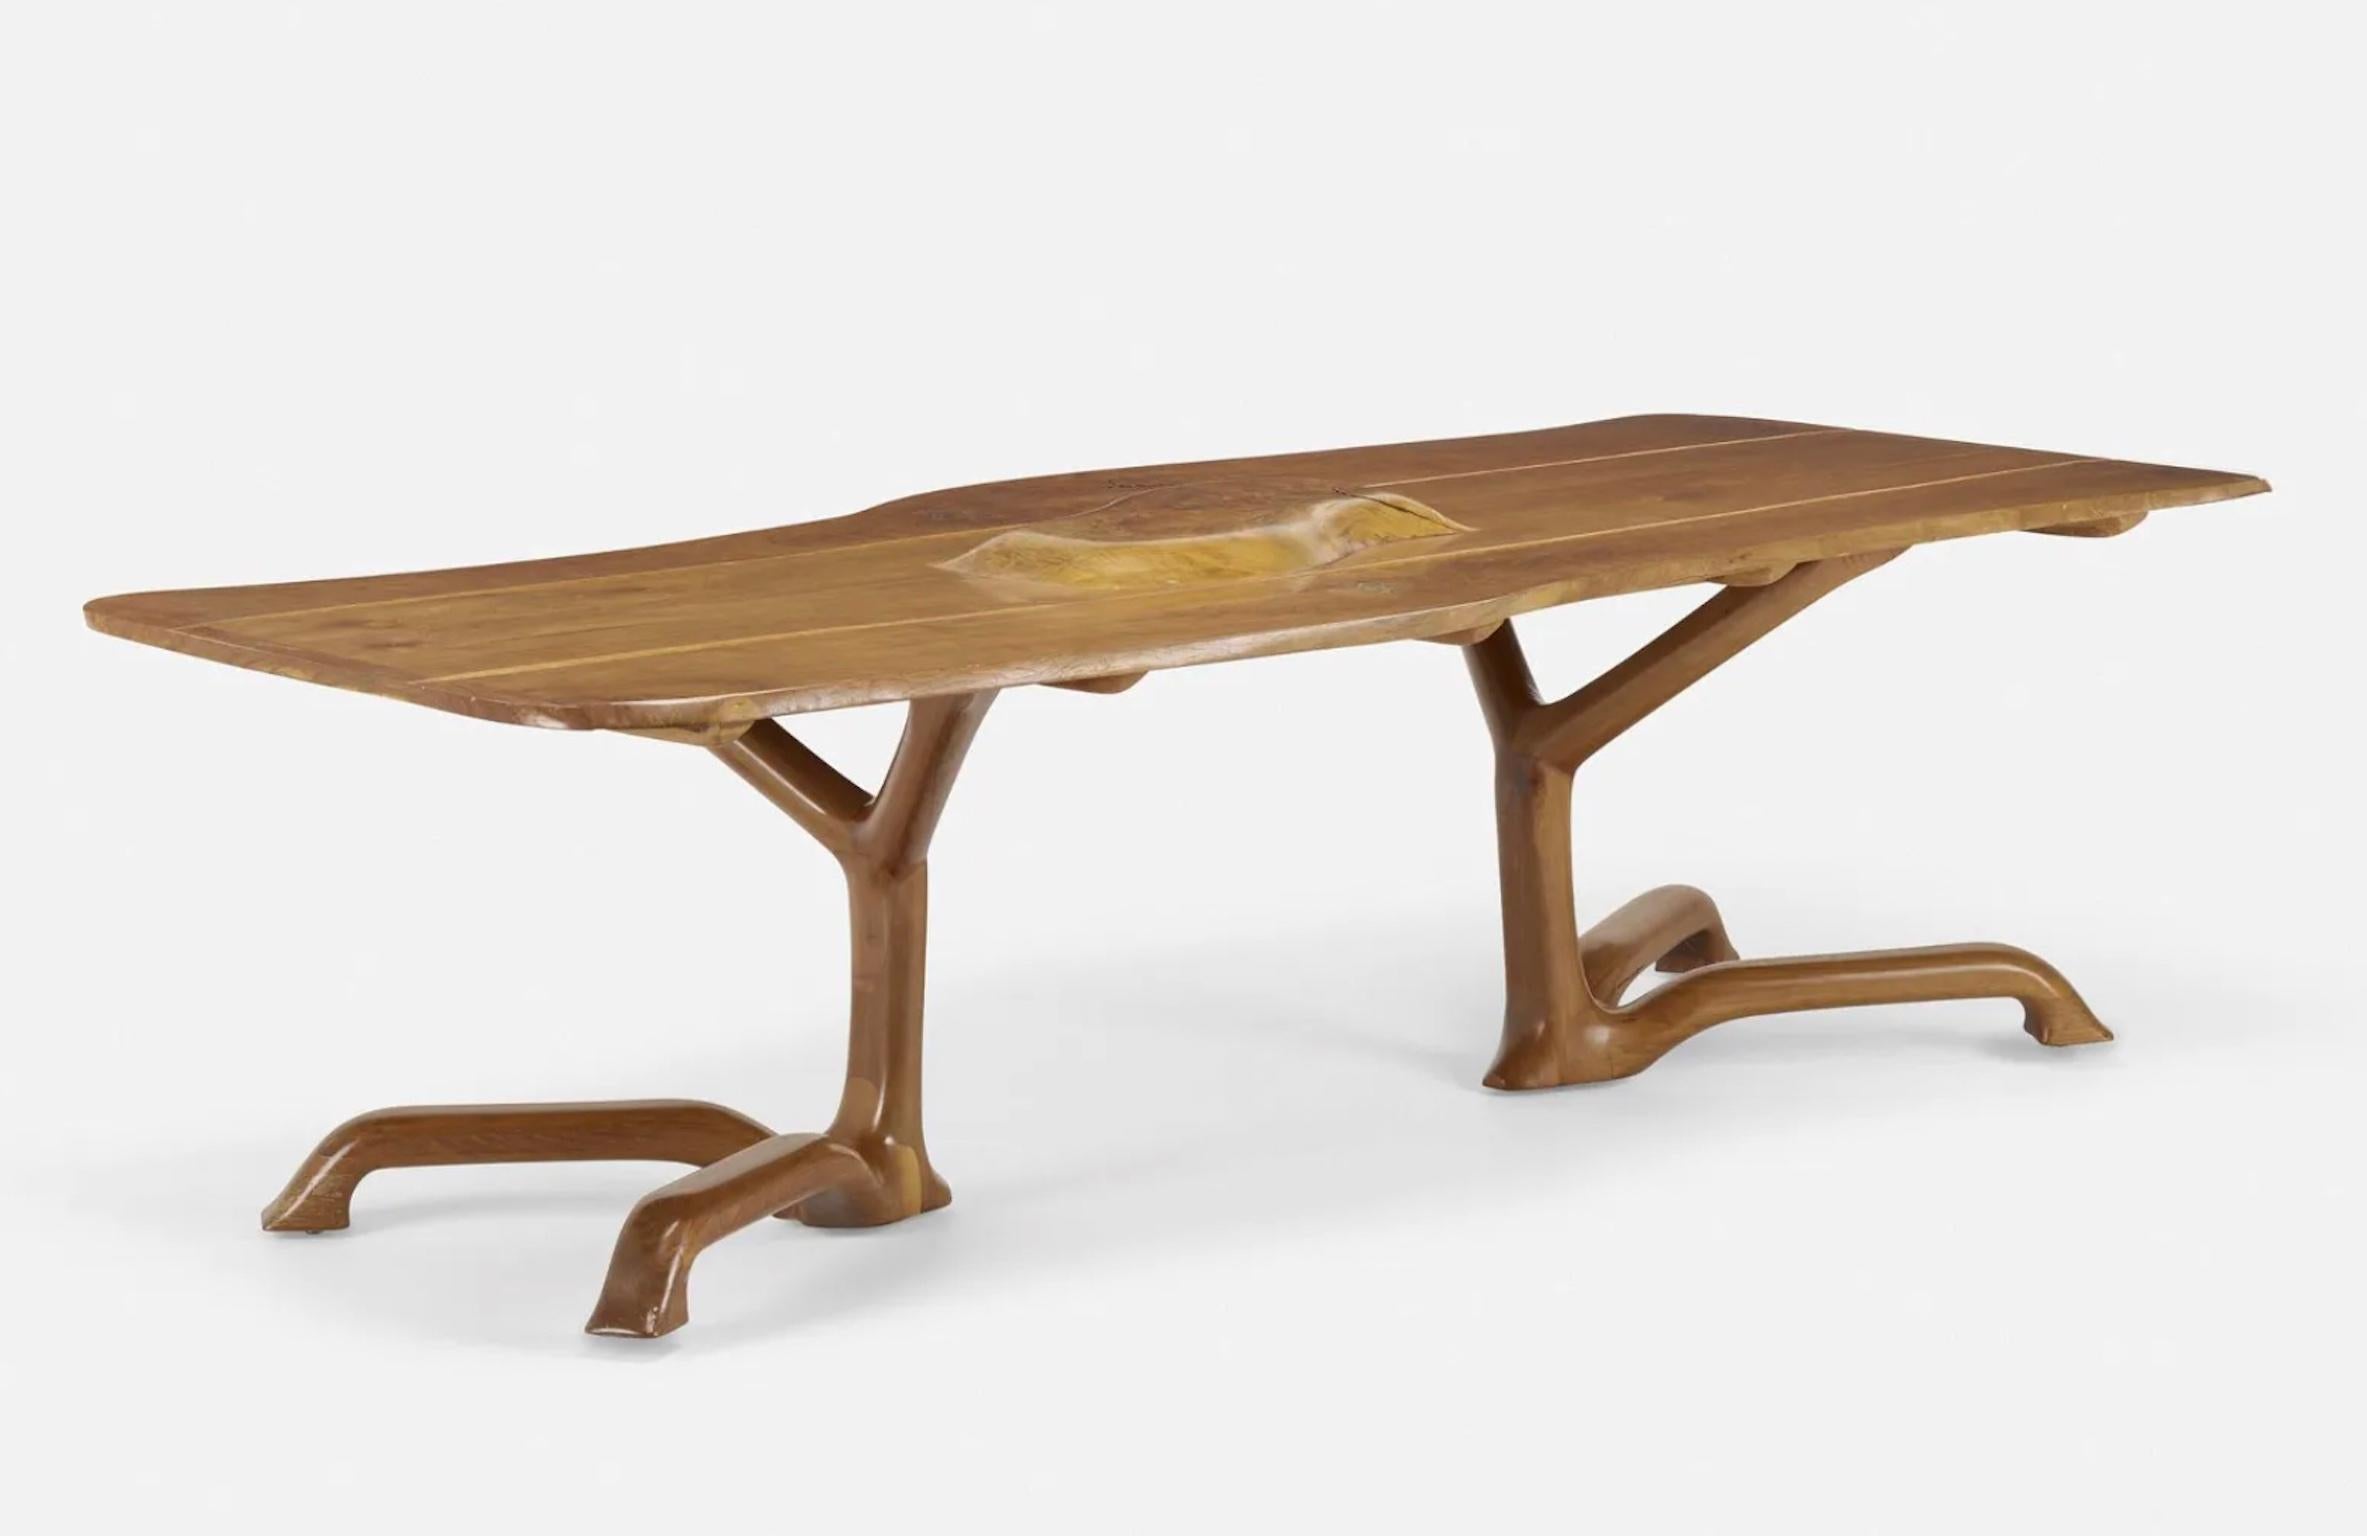 Late 20th Century Whimsical Handcrafted Organic Studio Craft Dining Table 1974 by Ejner Pagh For Sale